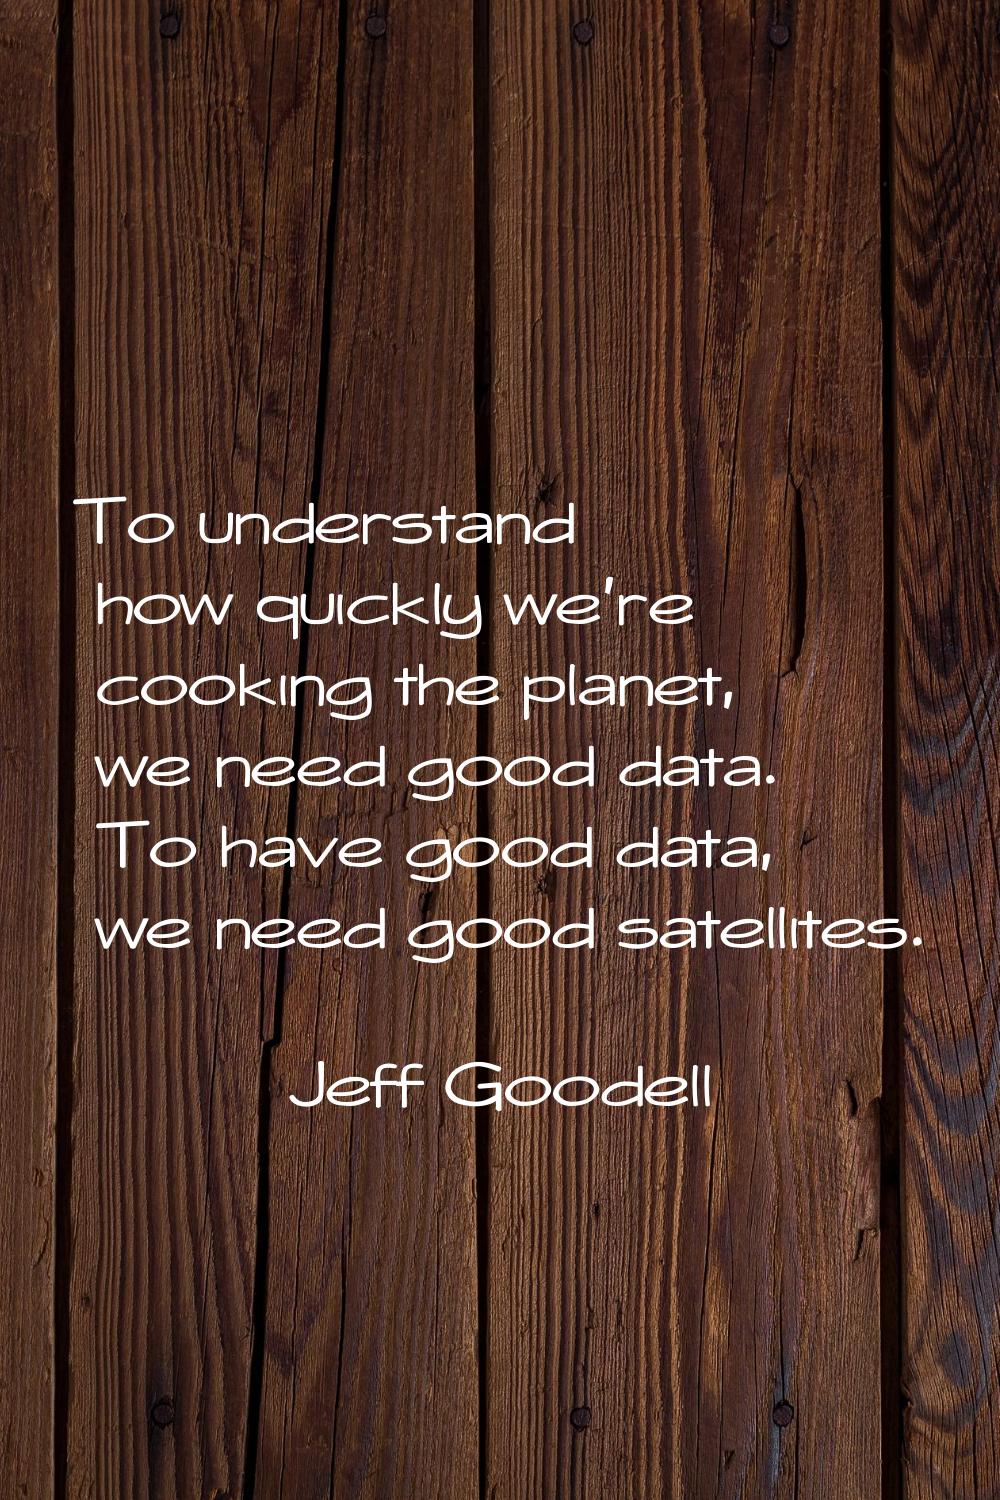 To understand how quickly we're cooking the planet, we need good data. To have good data, we need g